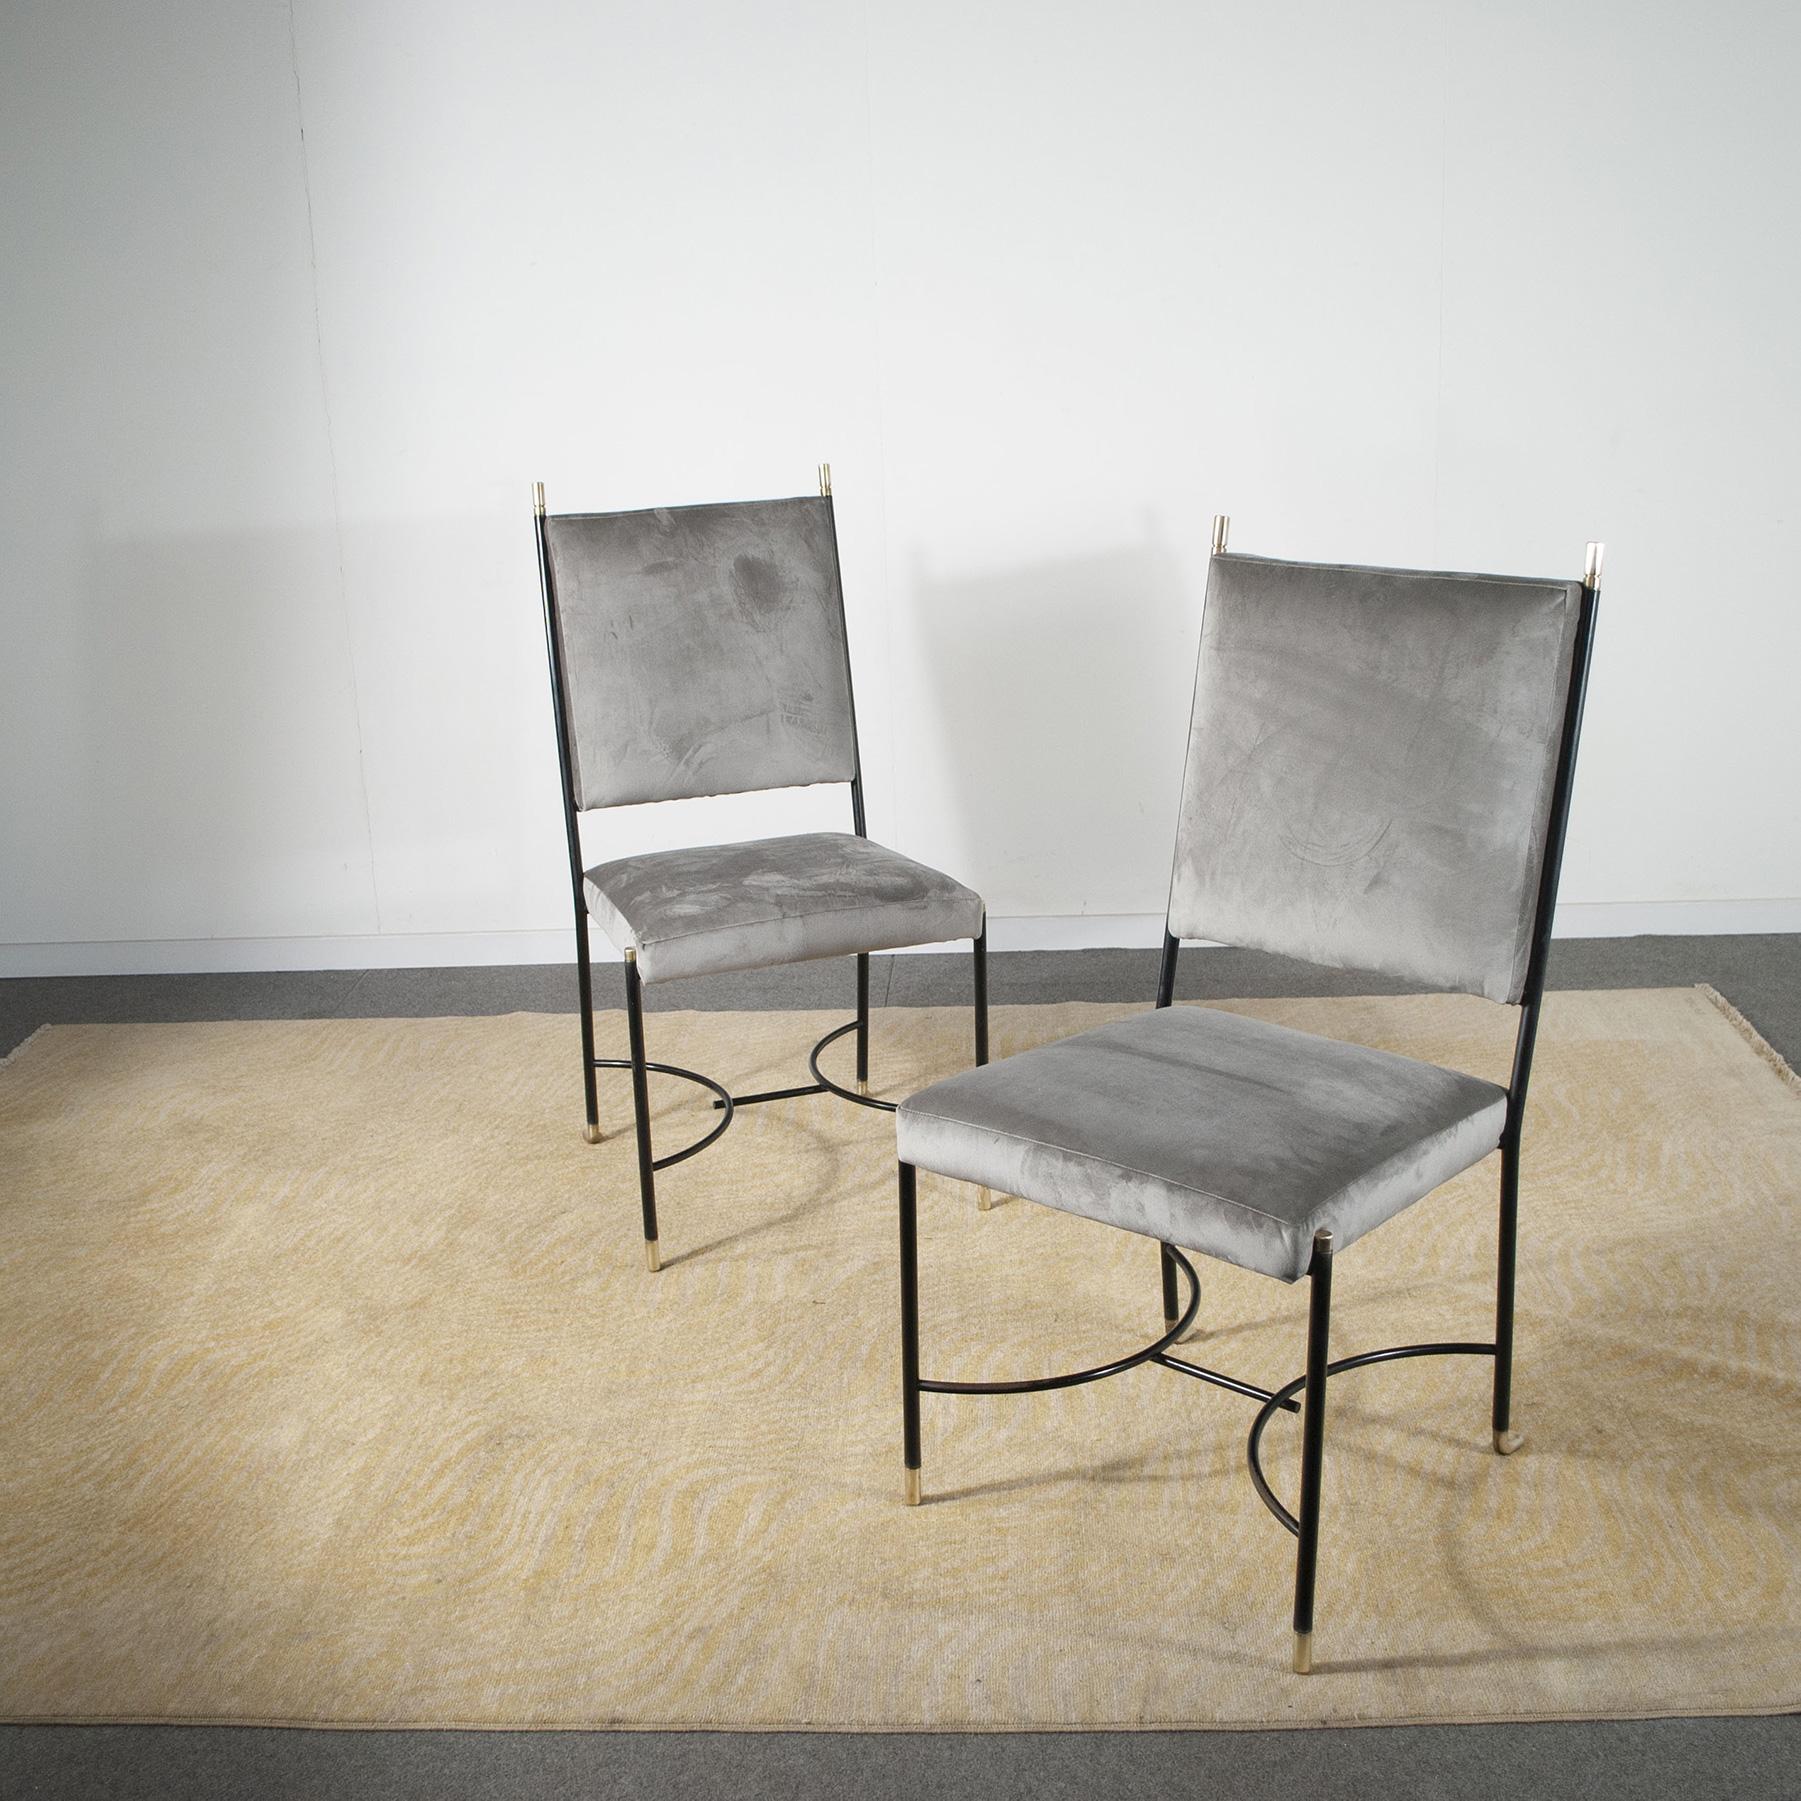 Set of two Regency-style chairs by Luigi Caccia Dominioni iron frame with brass ferrules in gray velvet 1960s.